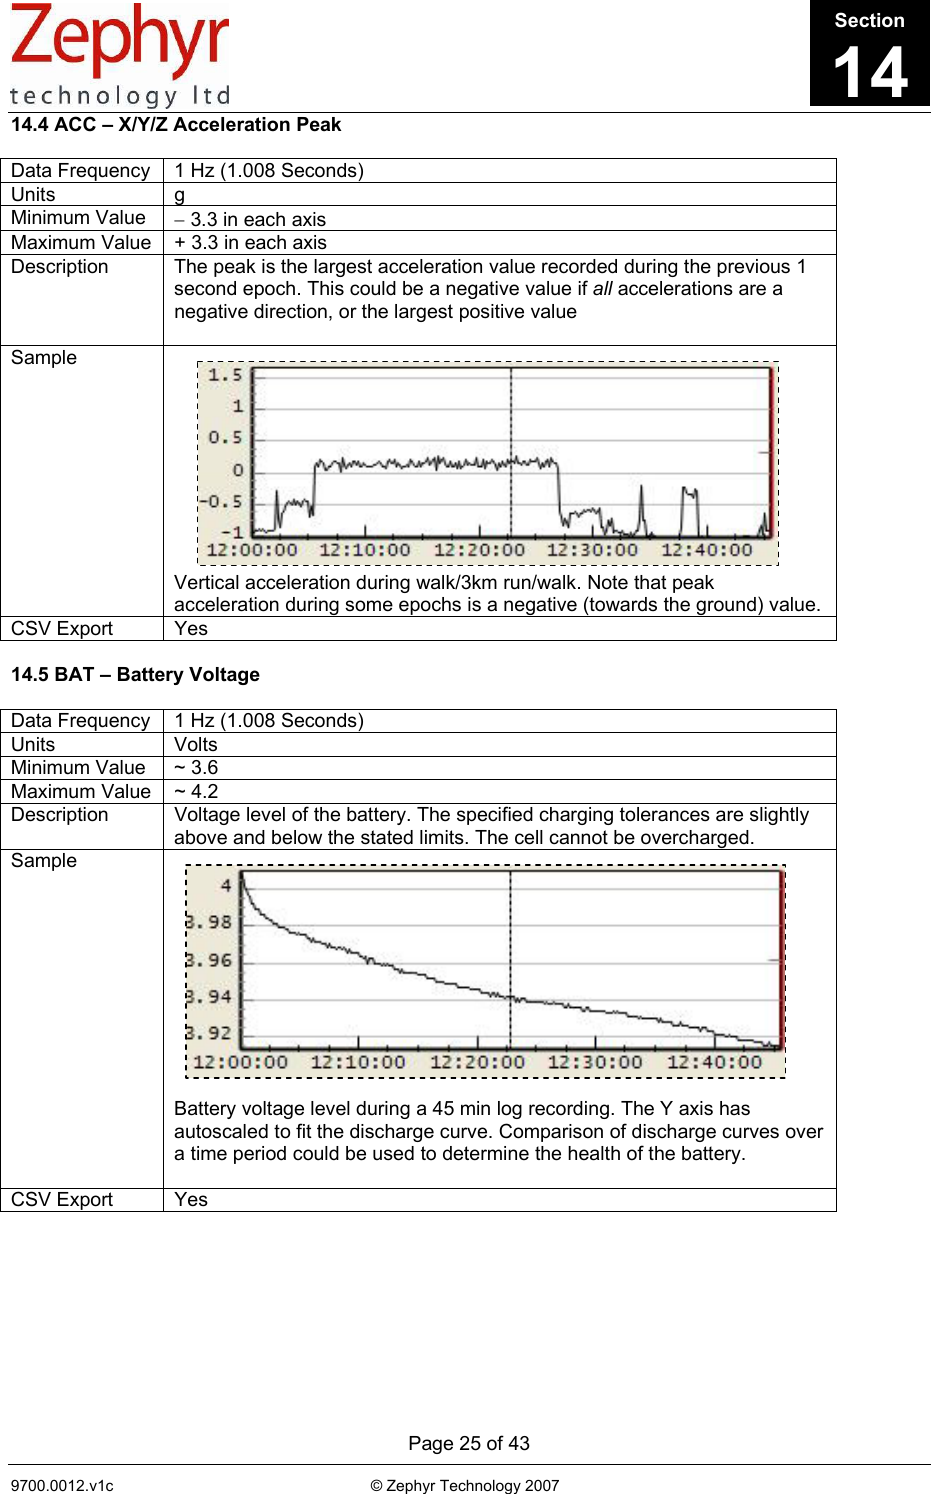      Page 25 of 43 9700.0012.v1c                                                           © Zephyr Technology 2007                                                            14.4 ACC – X/Y/Z Acceleration Peak  Data Frequency  1 Hz (1.008 Seconds) Units g Minimum Value  − 3.3 in each axis Maximum Value  + 3.3 in each axis Description  The peak is the largest acceleration value recorded during the previous 1 second epoch. This could be a negative value if all accelerations are a negative direction, or the largest positive value  Sample            Vertical acceleration during walk/3km run/walk. Note that peak acceleration during some epochs is a negative (towards the ground) value. CSV Export  Yes  14.5 BAT – Battery Voltage  Data Frequency  1 Hz (1.008 Seconds) Units Volts Minimum Value  ~ 3.6  Maximum Value  ~ 4.2 Description  Voltage level of the battery. The specified charging tolerances are slightly above and below the stated limits. The cell cannot be overcharged. Sample             Battery voltage level during a 45 min log recording. The Y axis has autoscaled to fit the discharge curve. Comparison of discharge curves over a time period could be used to determine the health of the battery.  CSV Export  Yes Section14